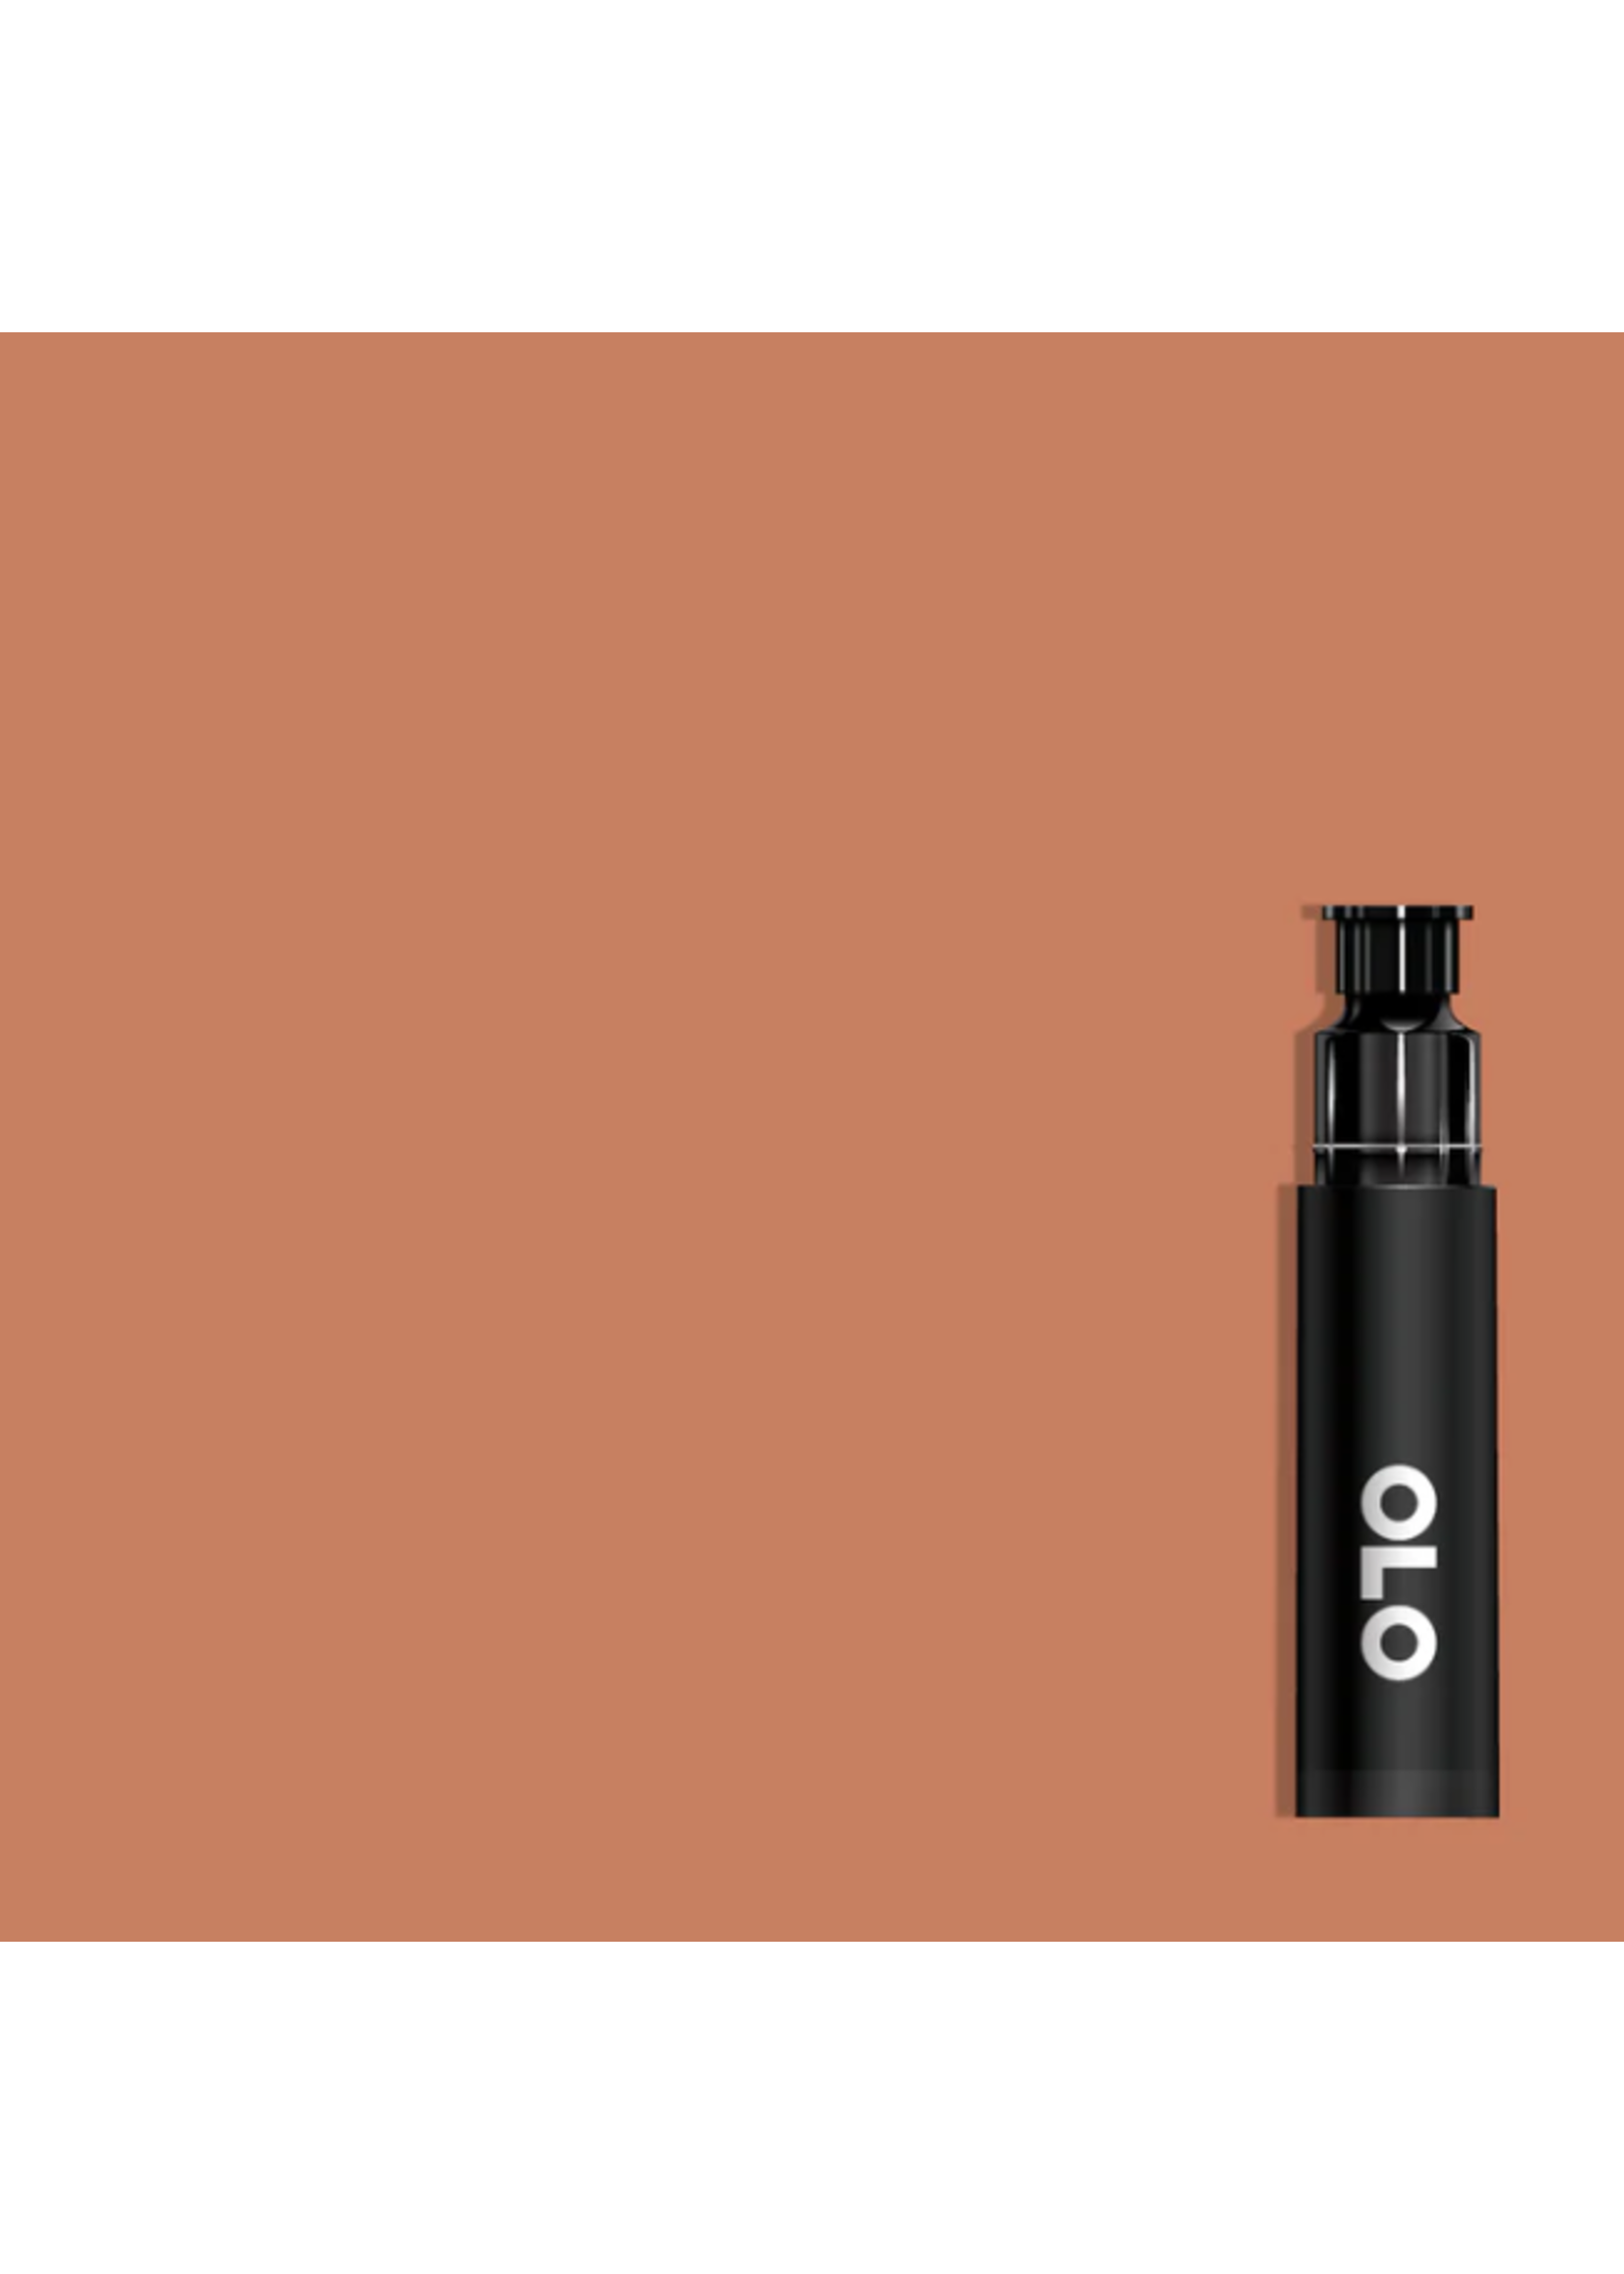 OLO OLO Brush Replacement Cartridge: Rosy Bonnet